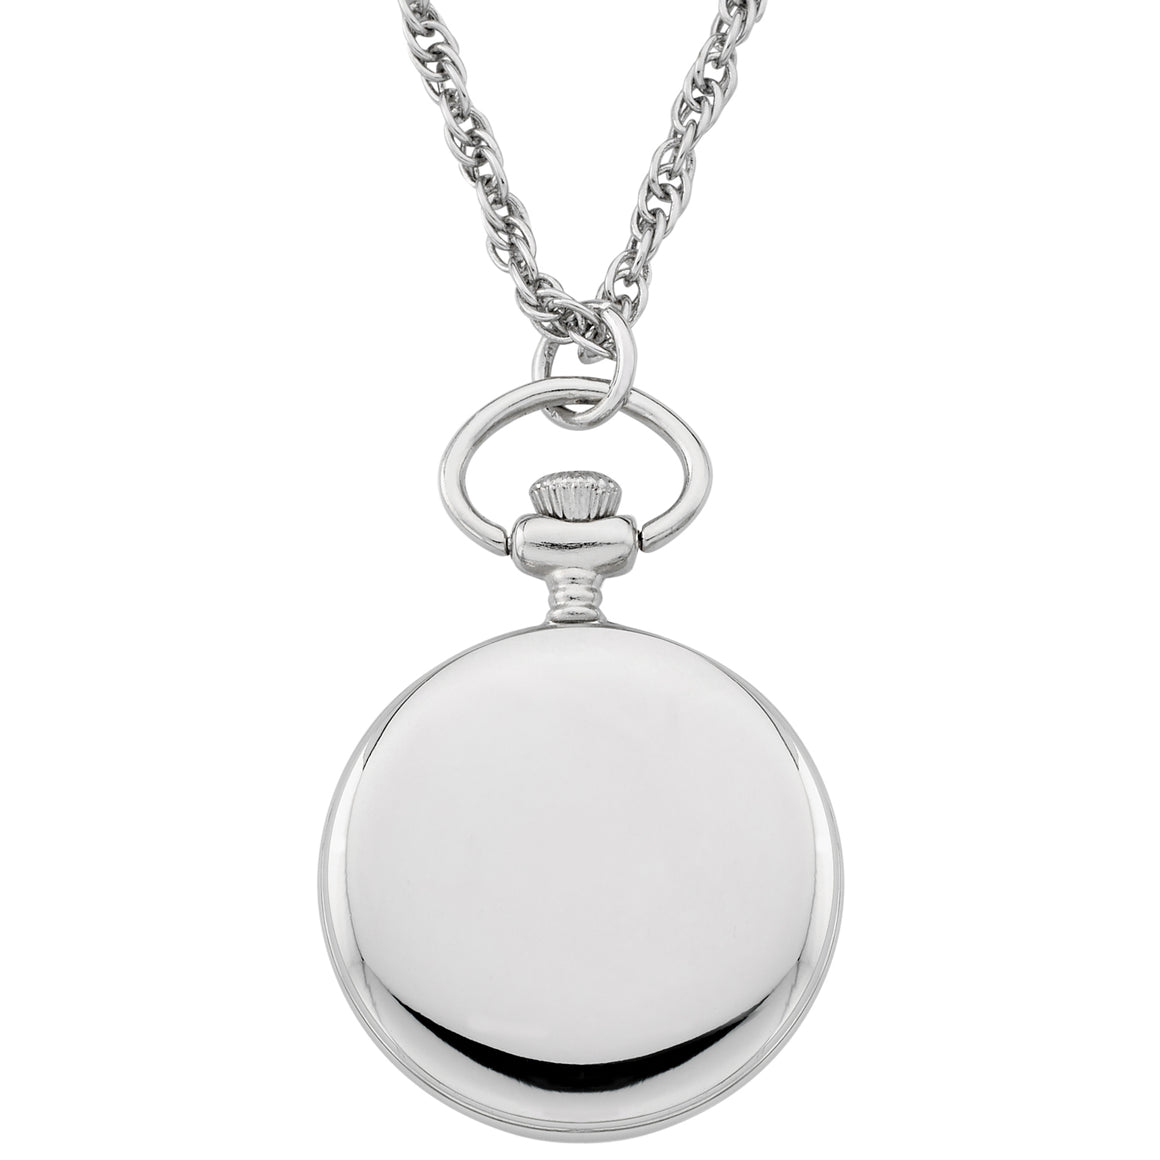 Gotham Women's Silver-Tone Open Face Pendant Watch with Chain # GWC14140SA